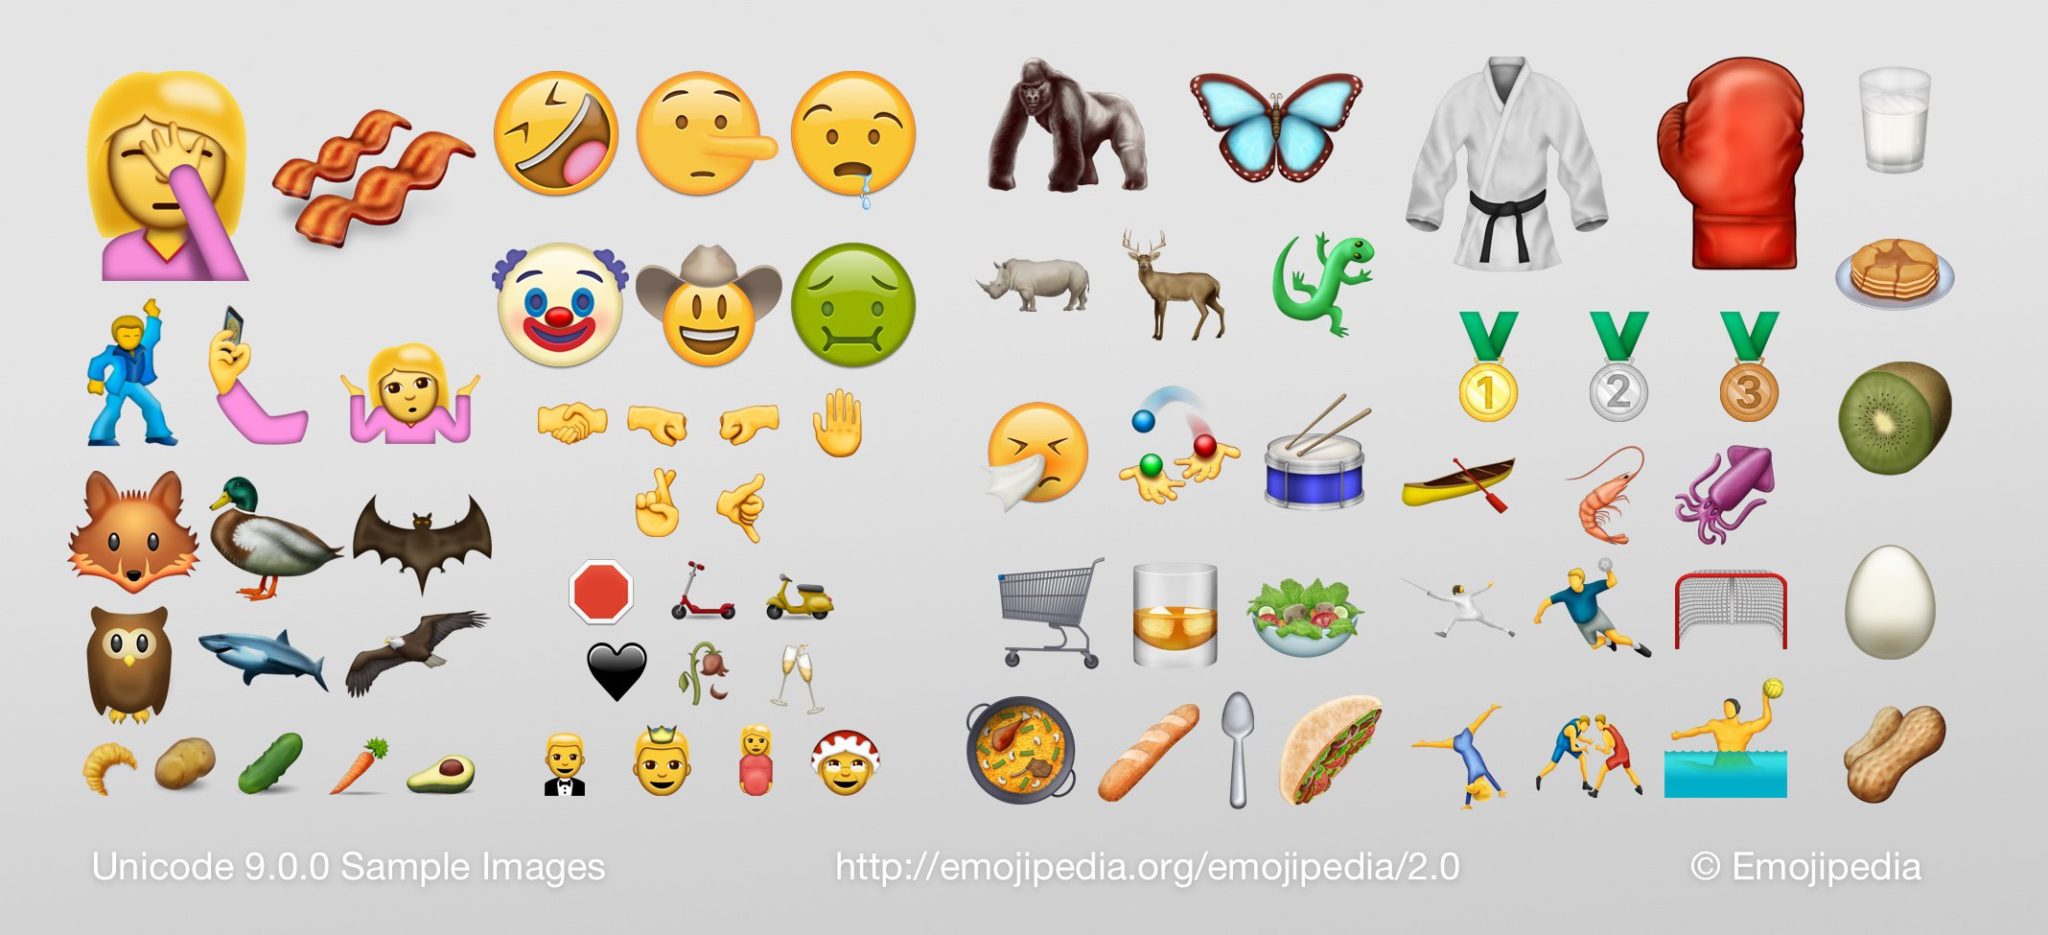 New Emoji S All Set To Release On Whatsapp